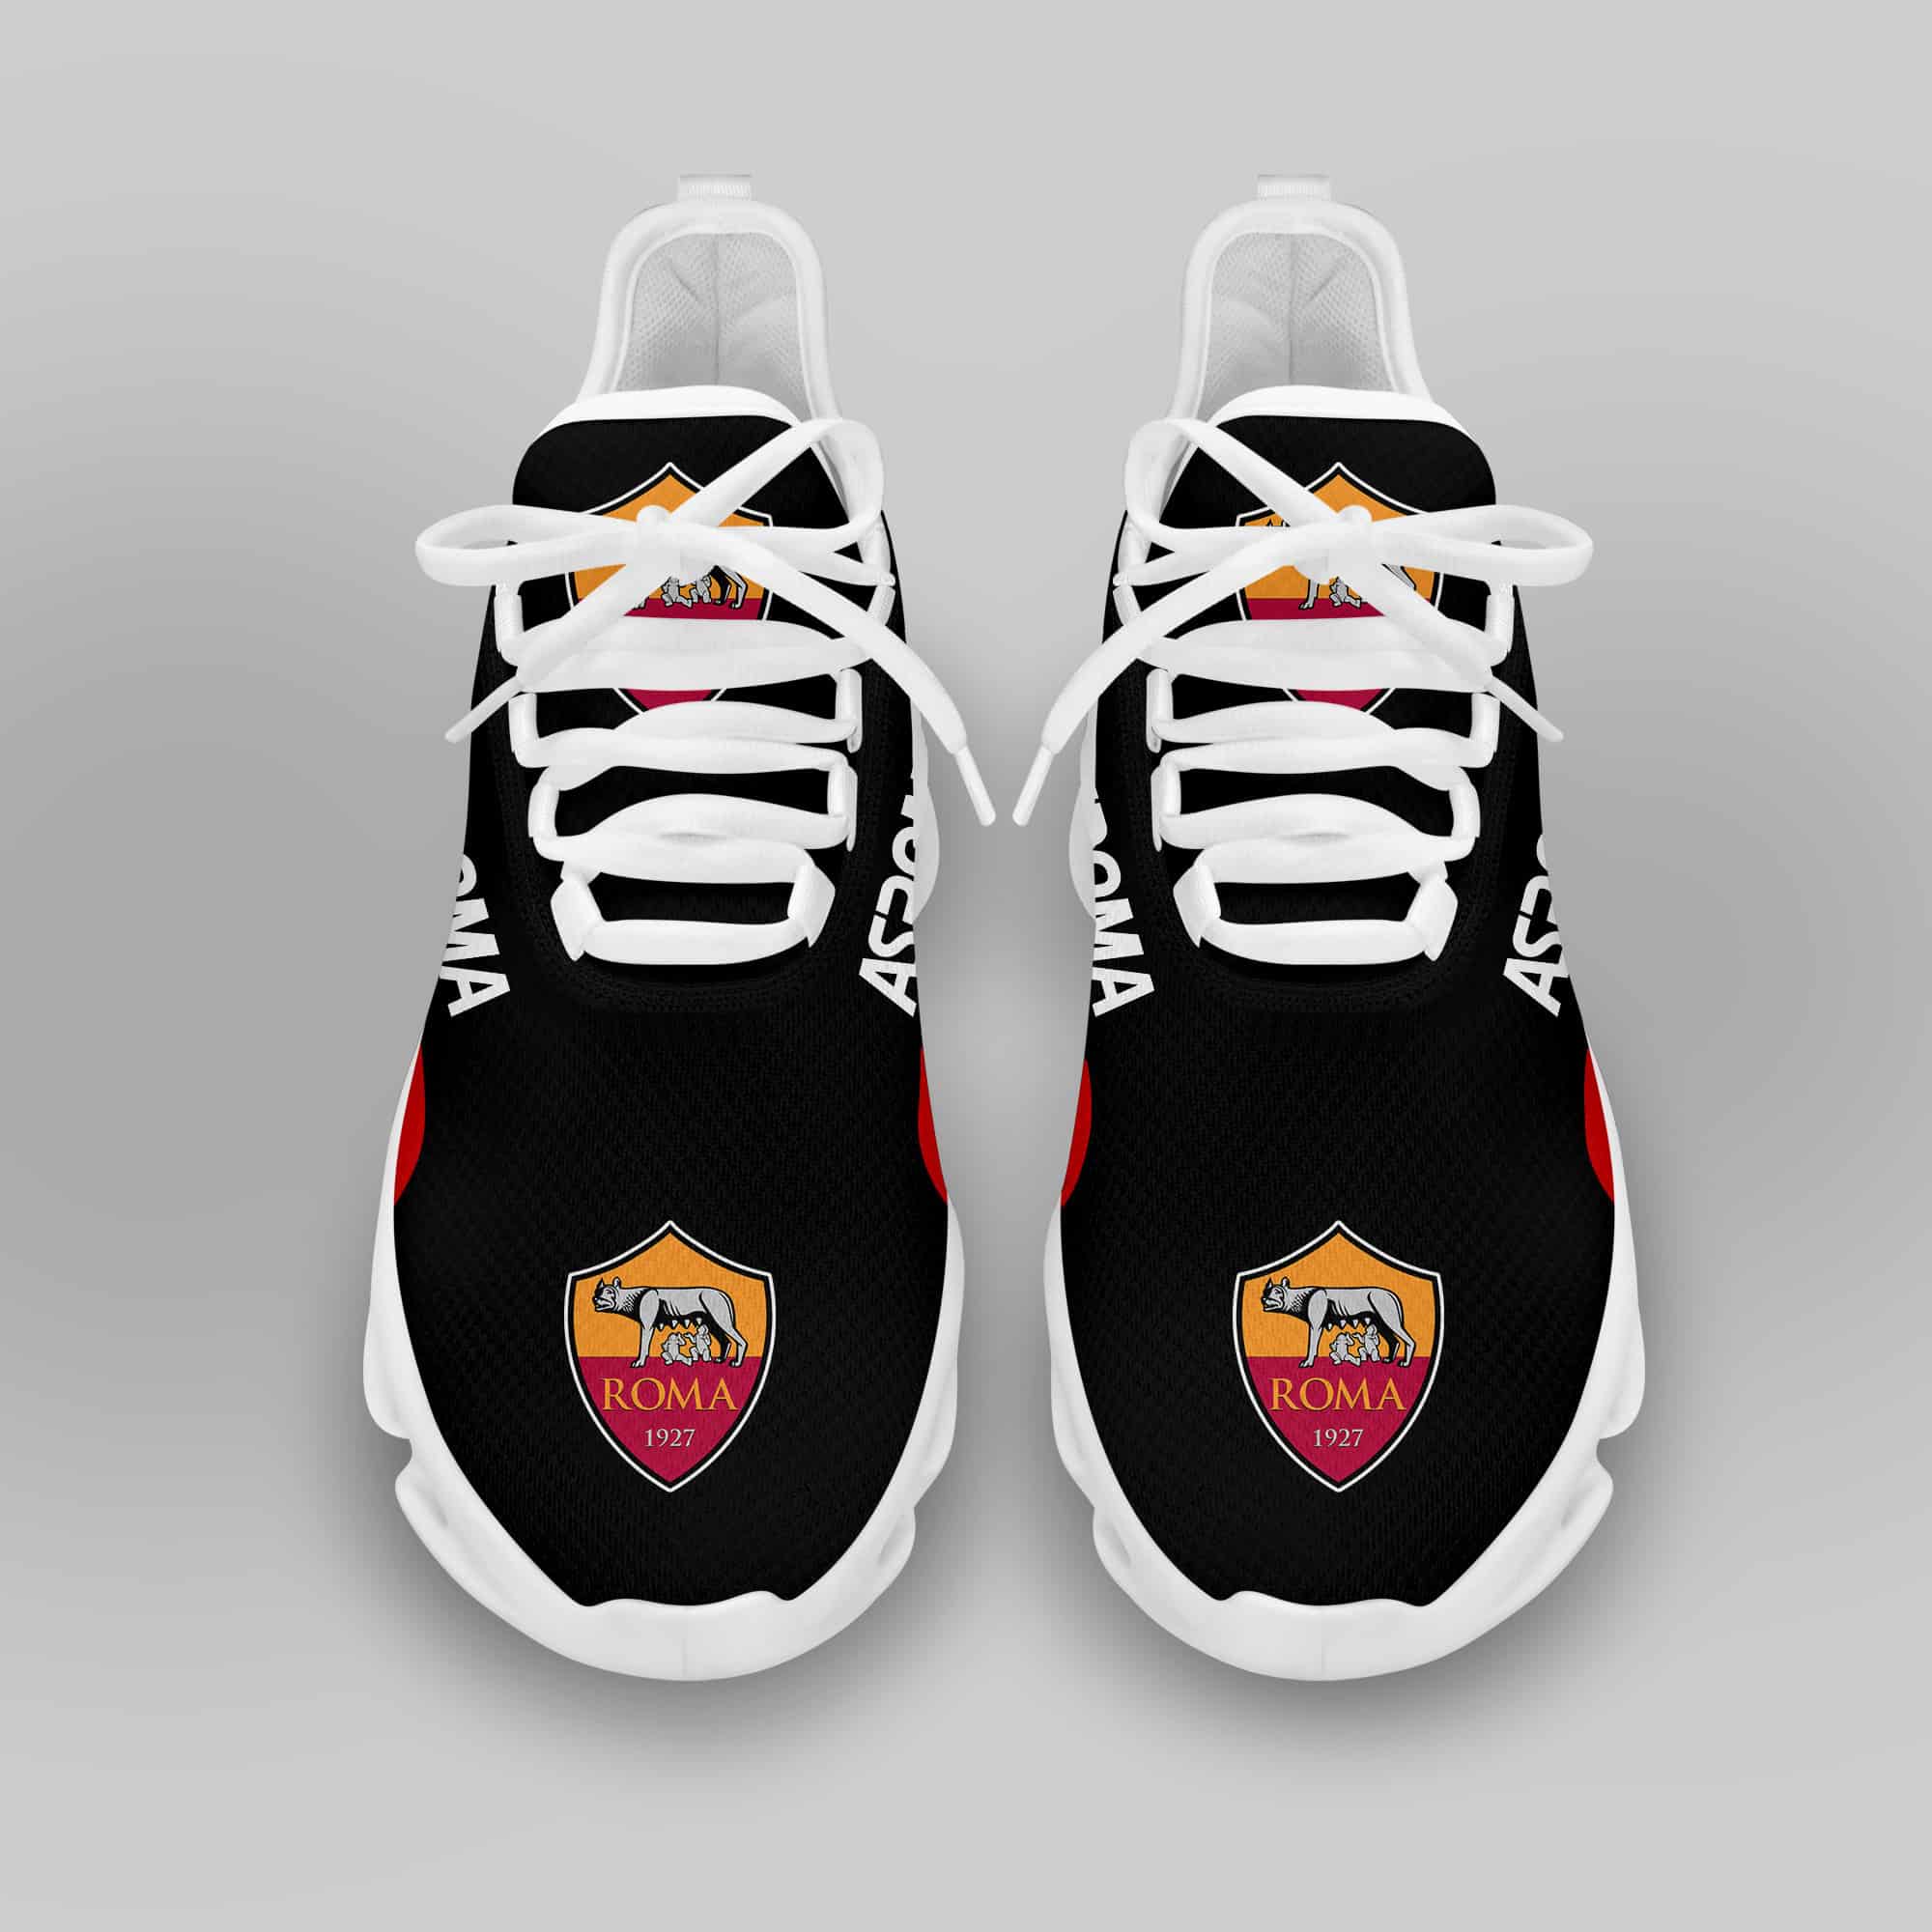 As Roma Running Shoes Max Soul Shoes Sneakers Ver 1 3